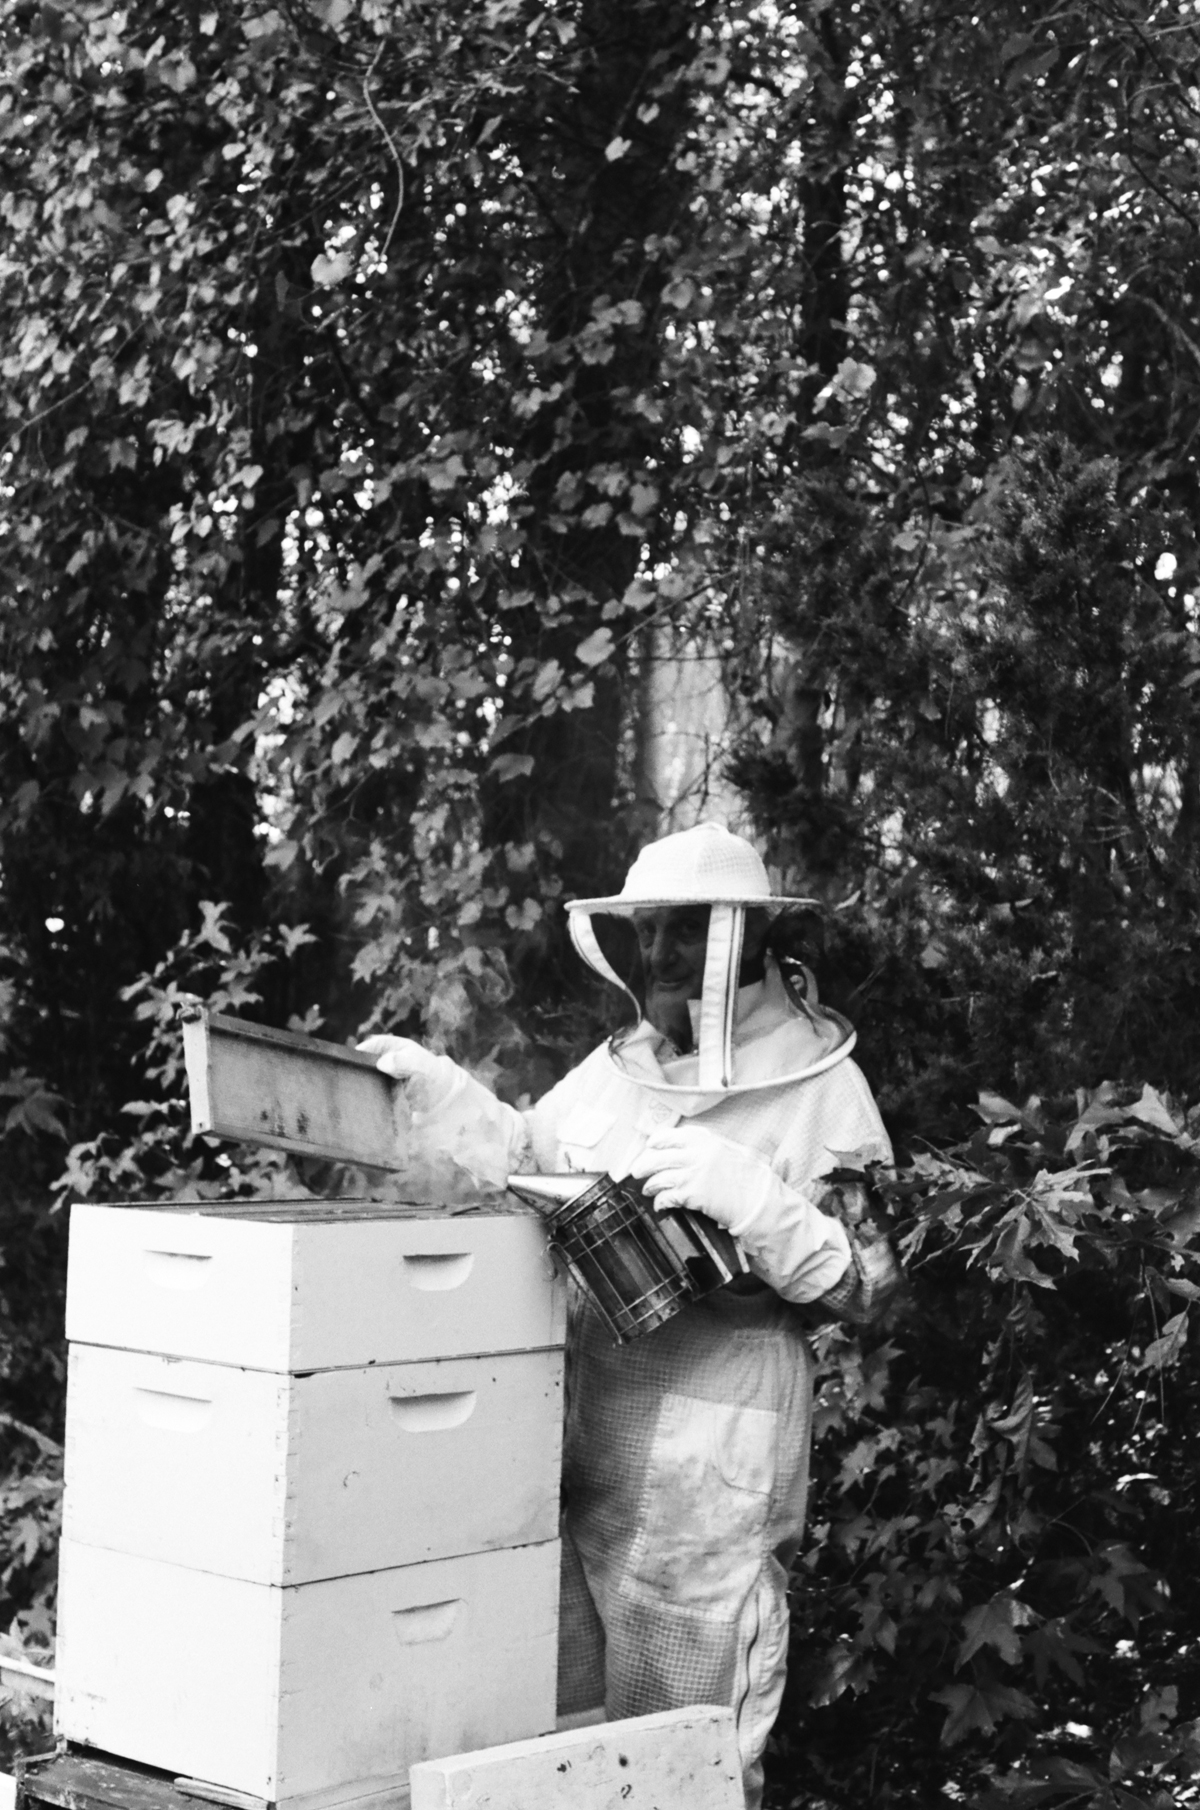 A beekeeper tends to his hives in a black-and-white photograph.